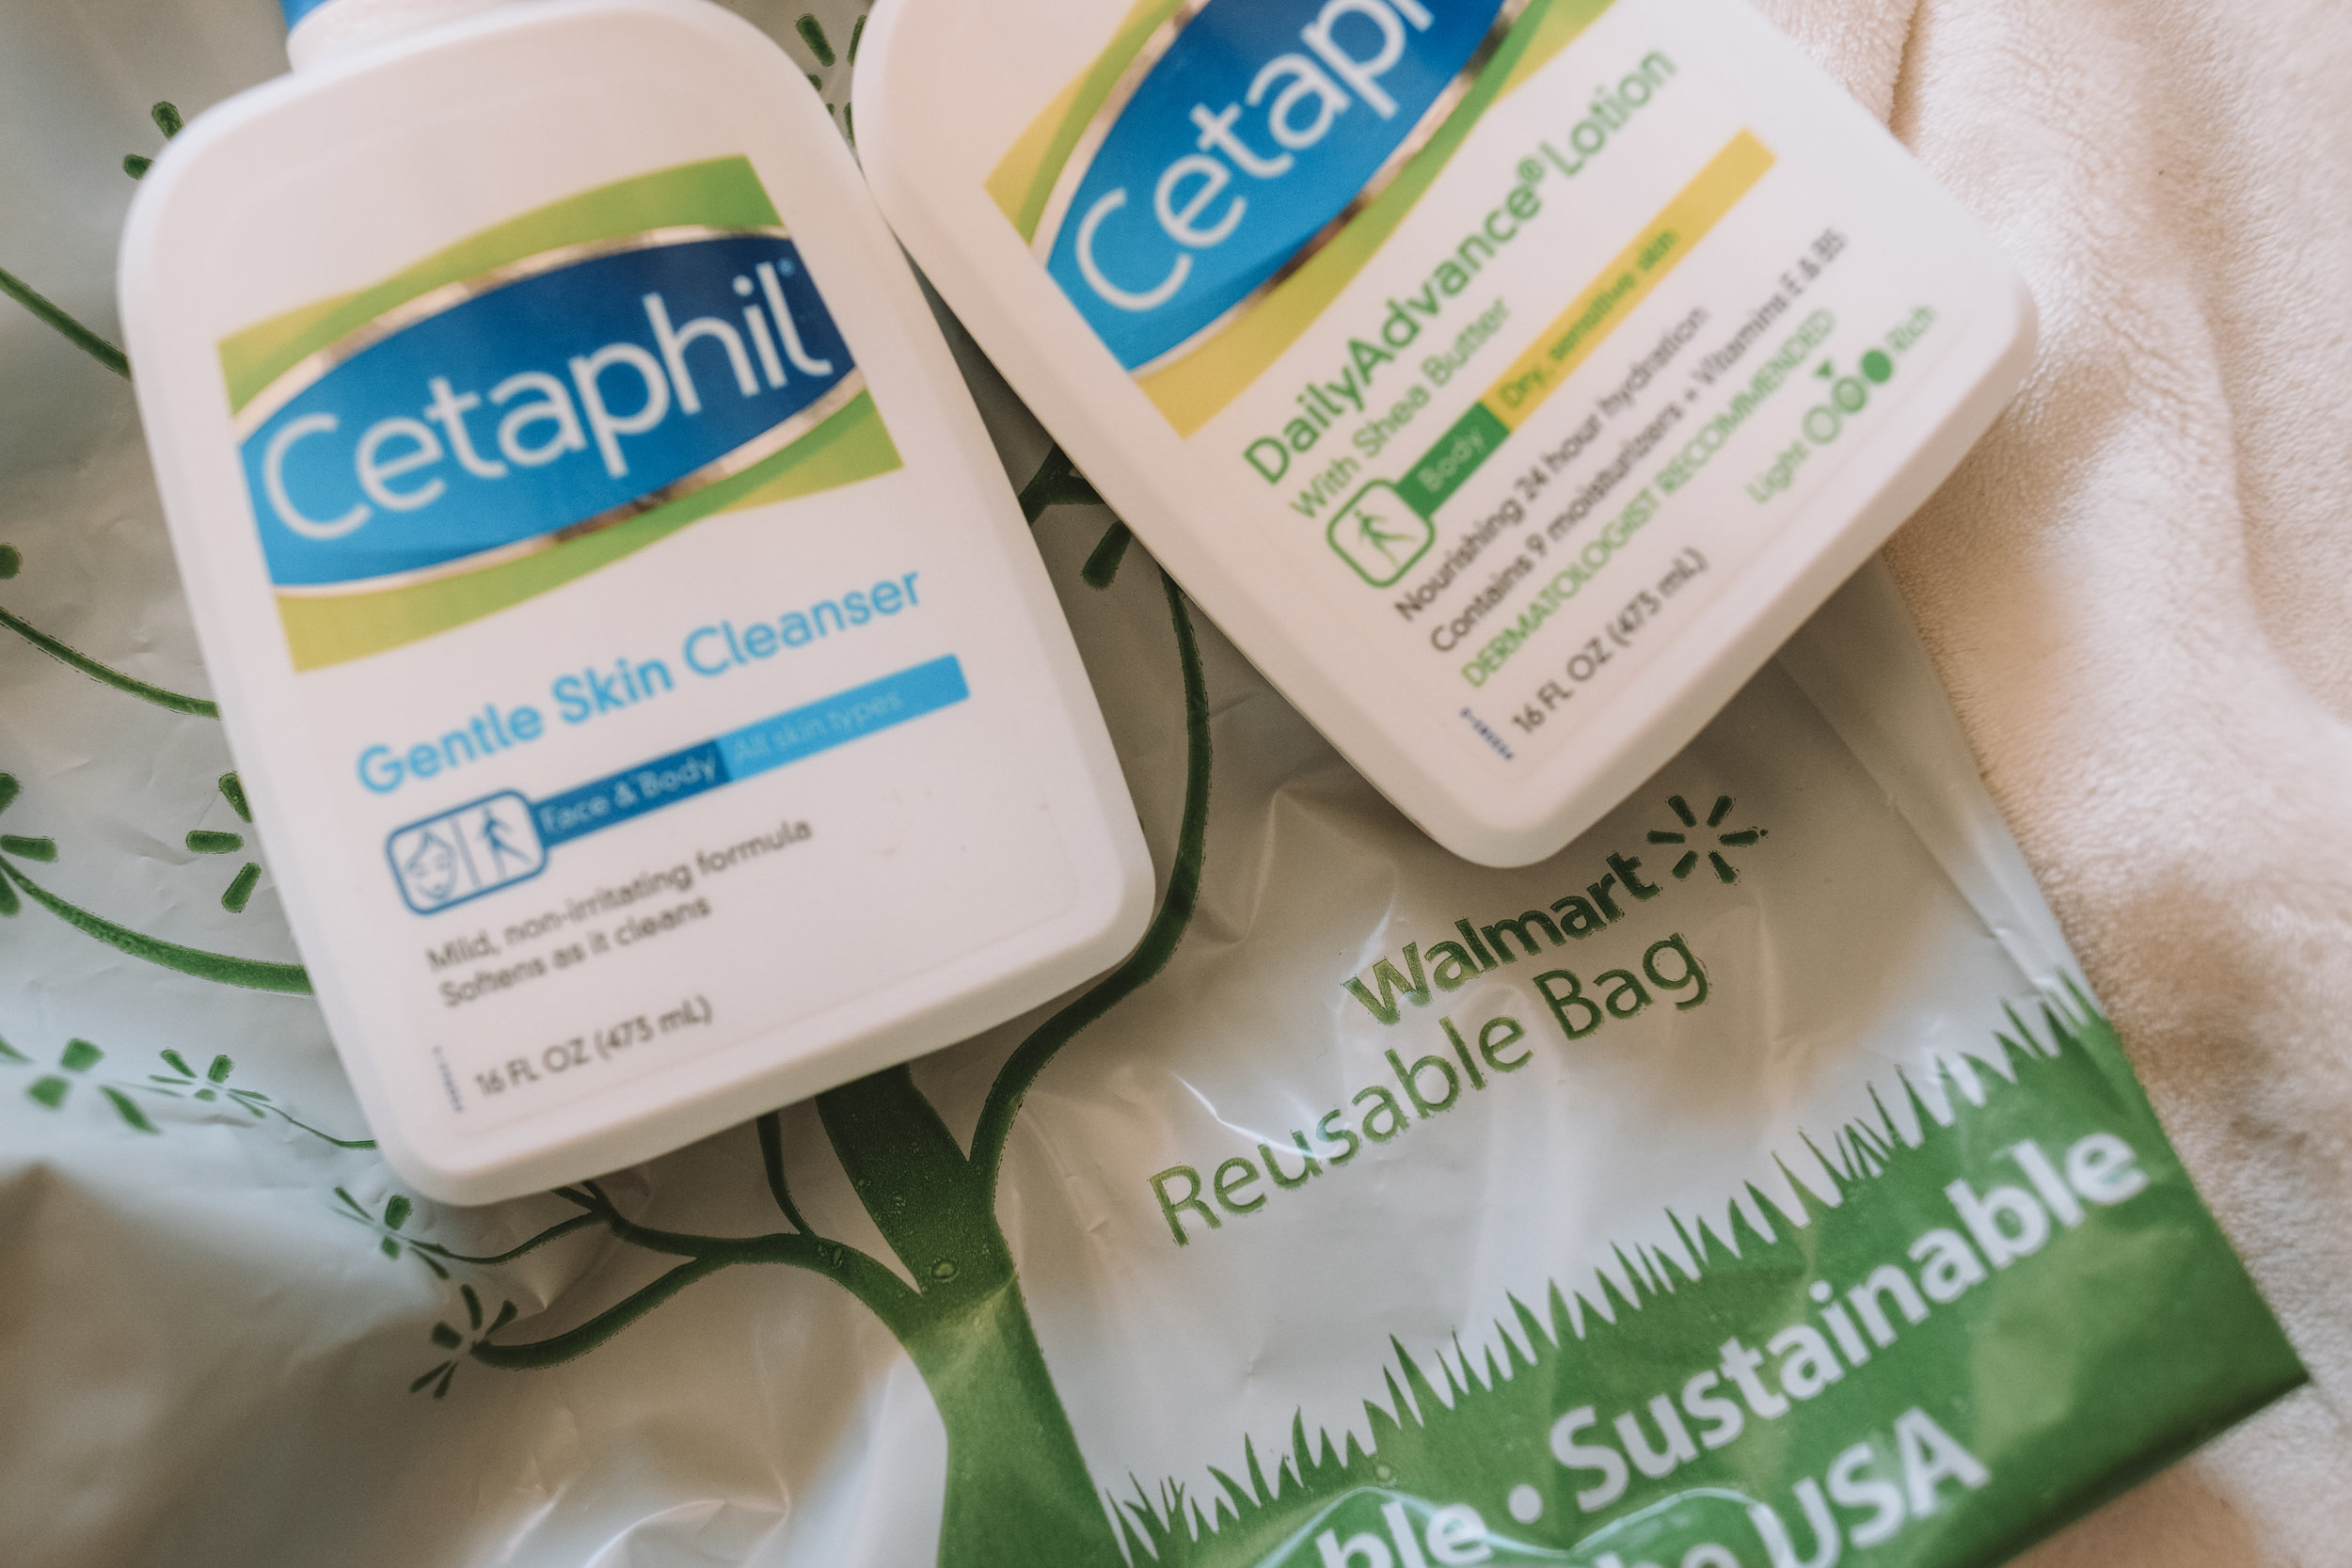 Which Cetaphil products are best for pregnancy?